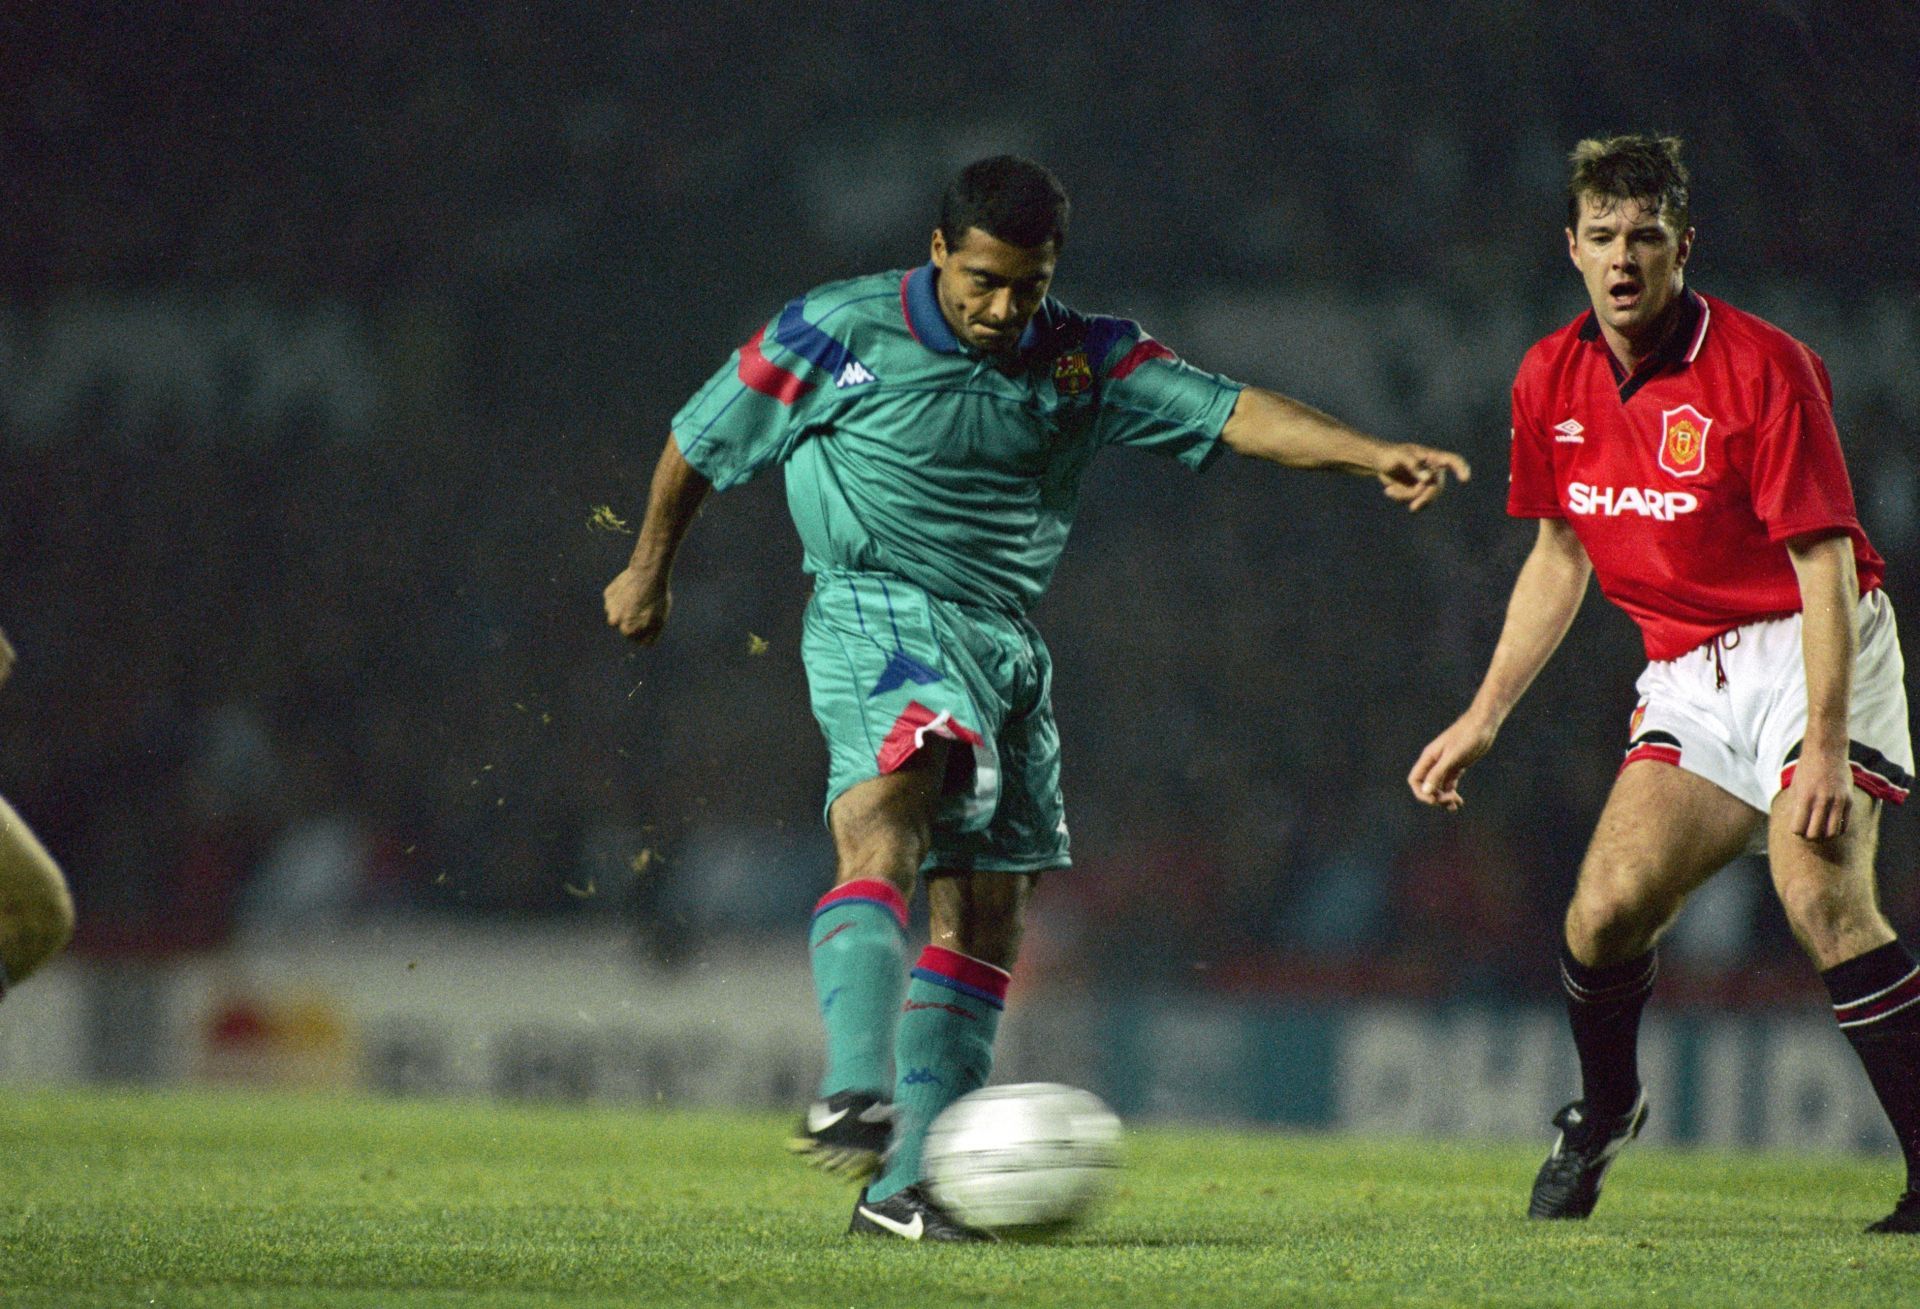 Romario in action for Barcelona